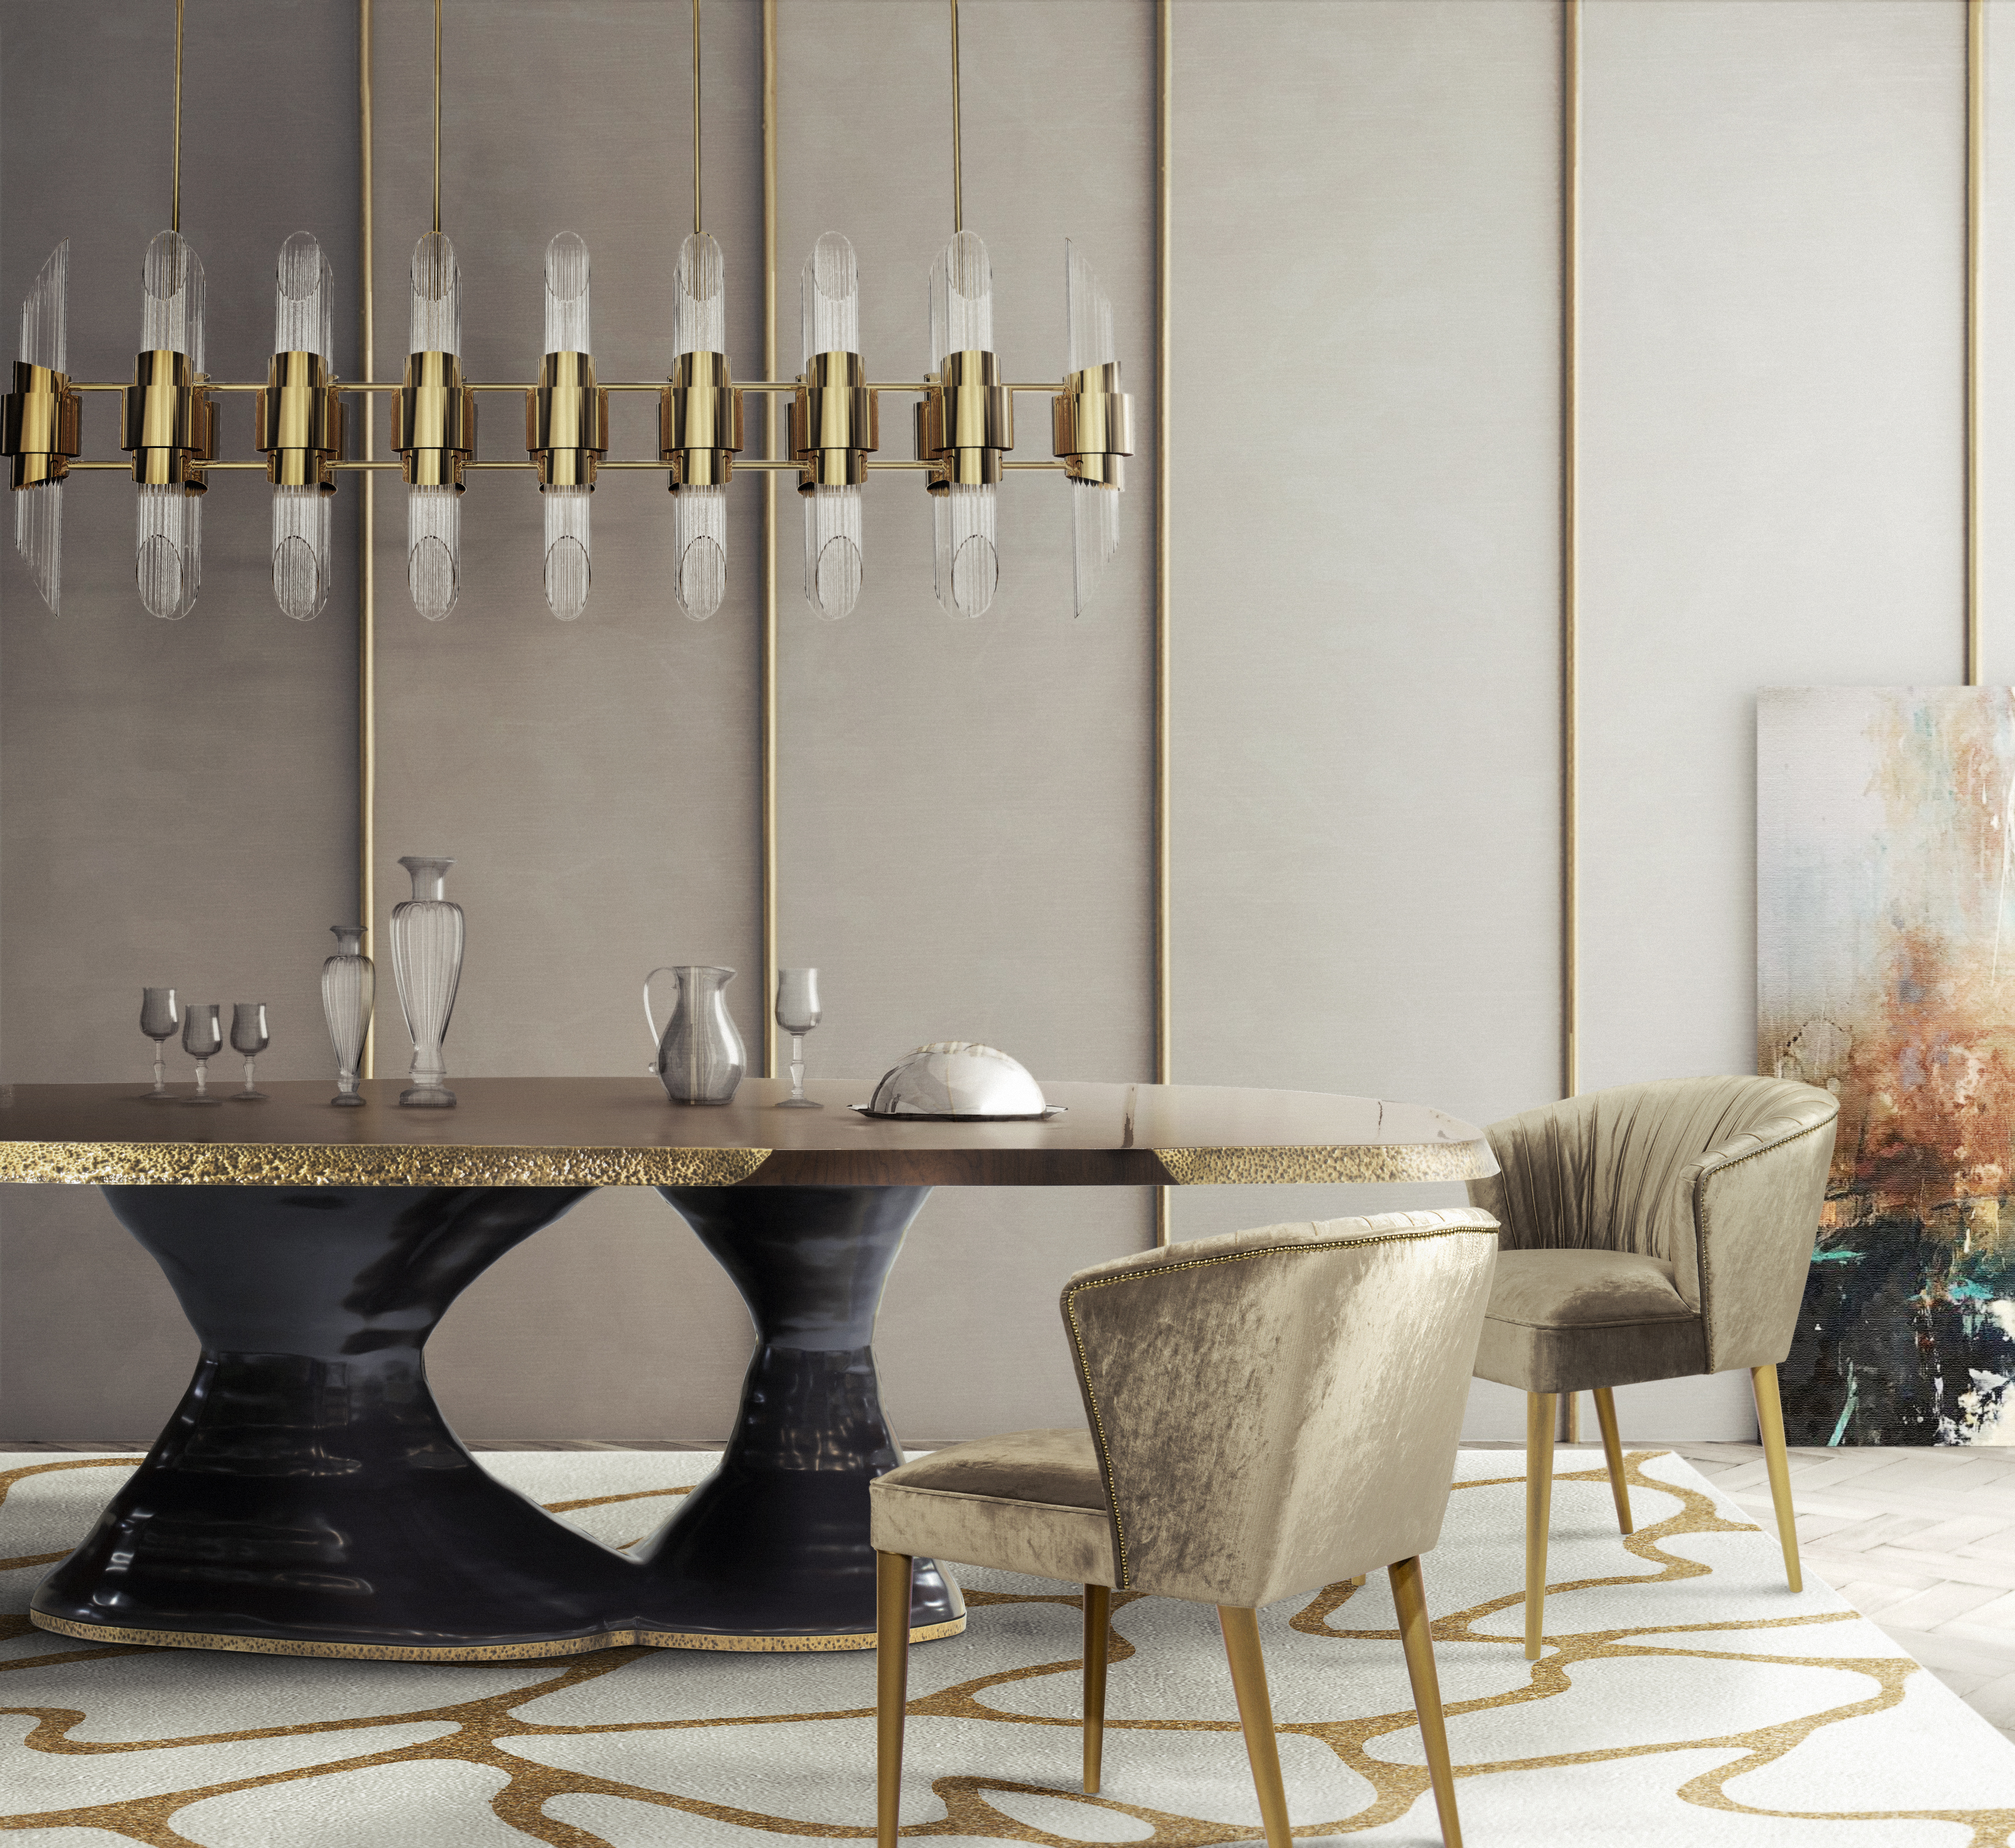 Luxurious Dining Room With Rug With Golden Details - Home'Society